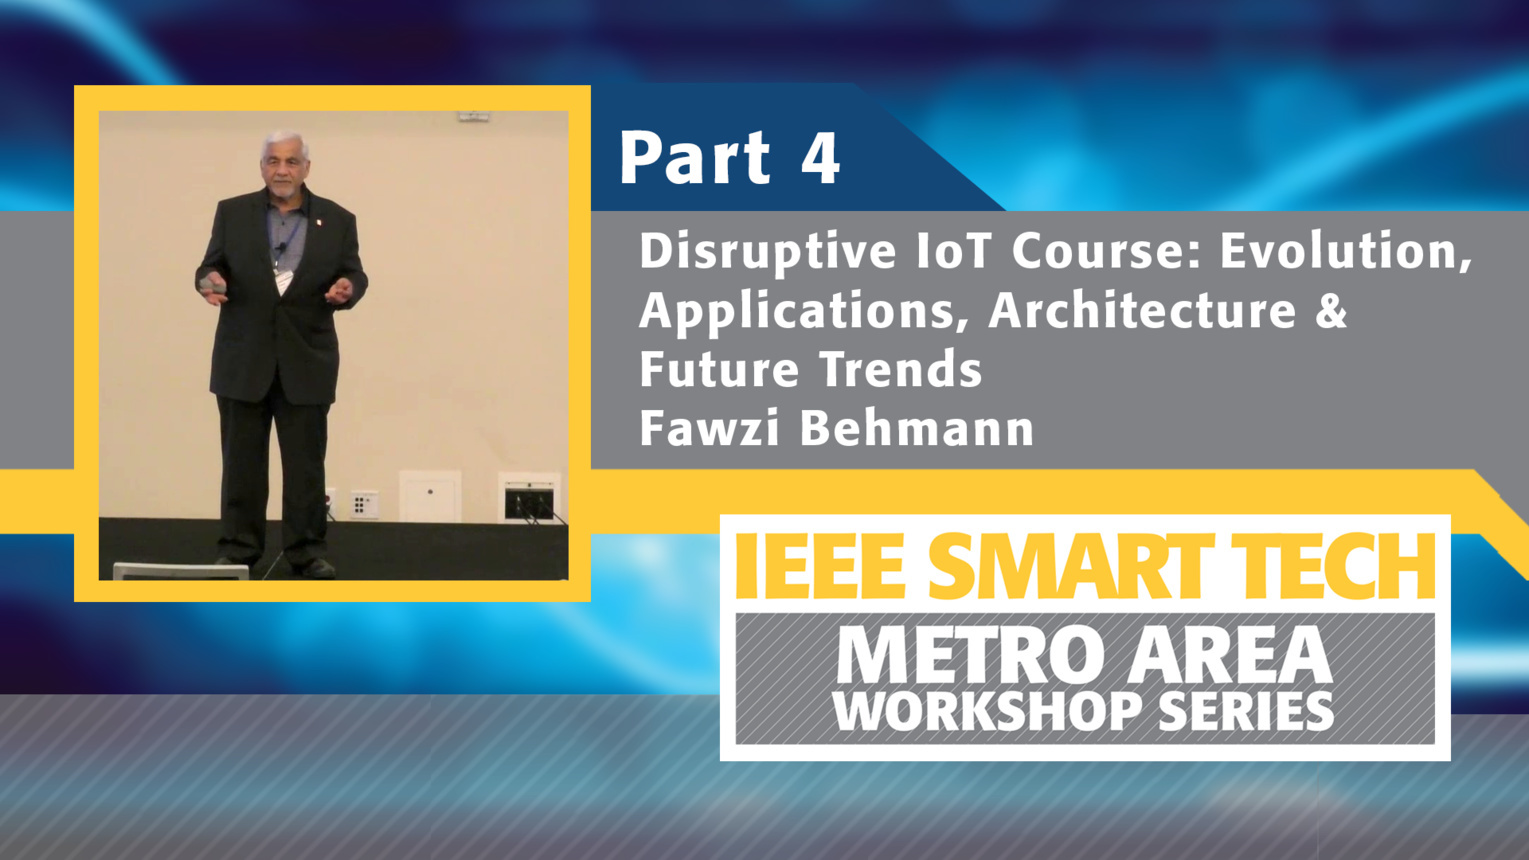 Disruptive Internet of Things course, Part 4 - IEEE Smart Tech Workshop